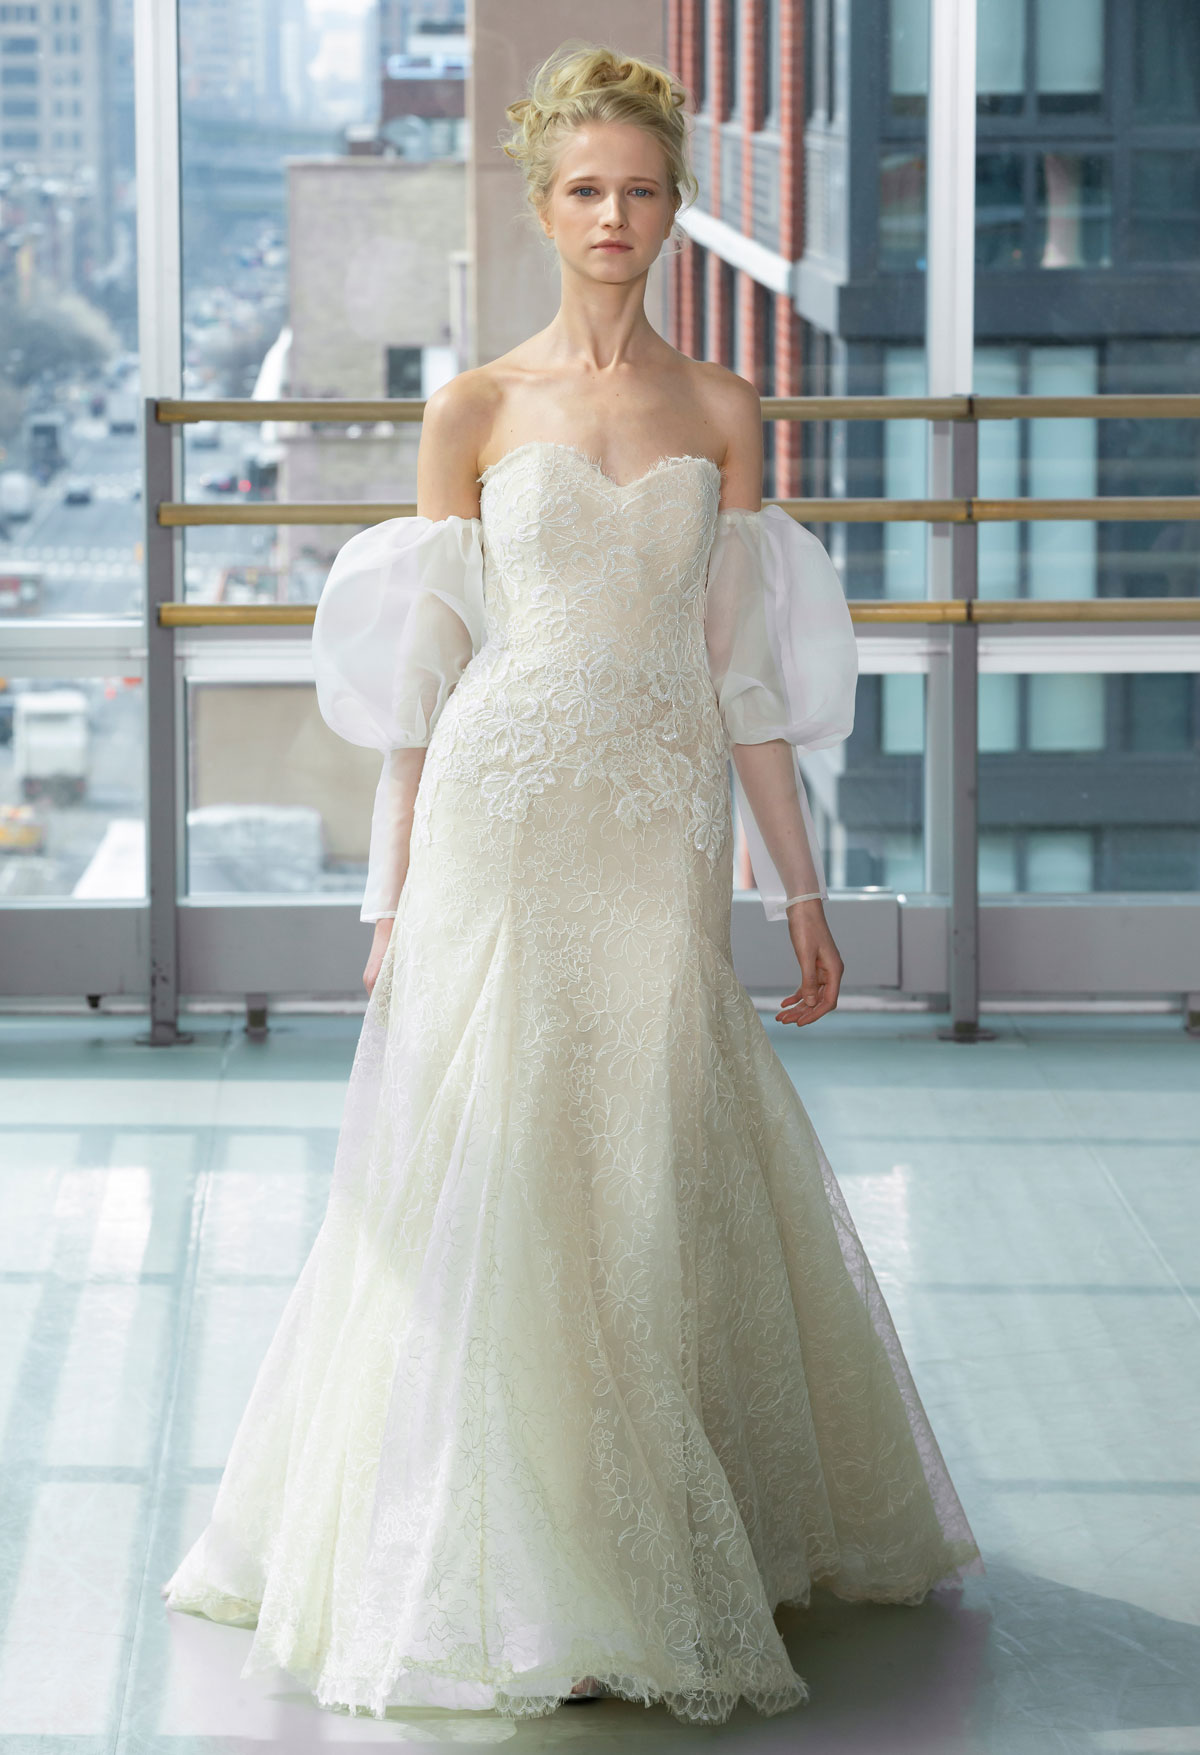 Wedding Gown Trends- Detached Sleeves by Gracy Accad